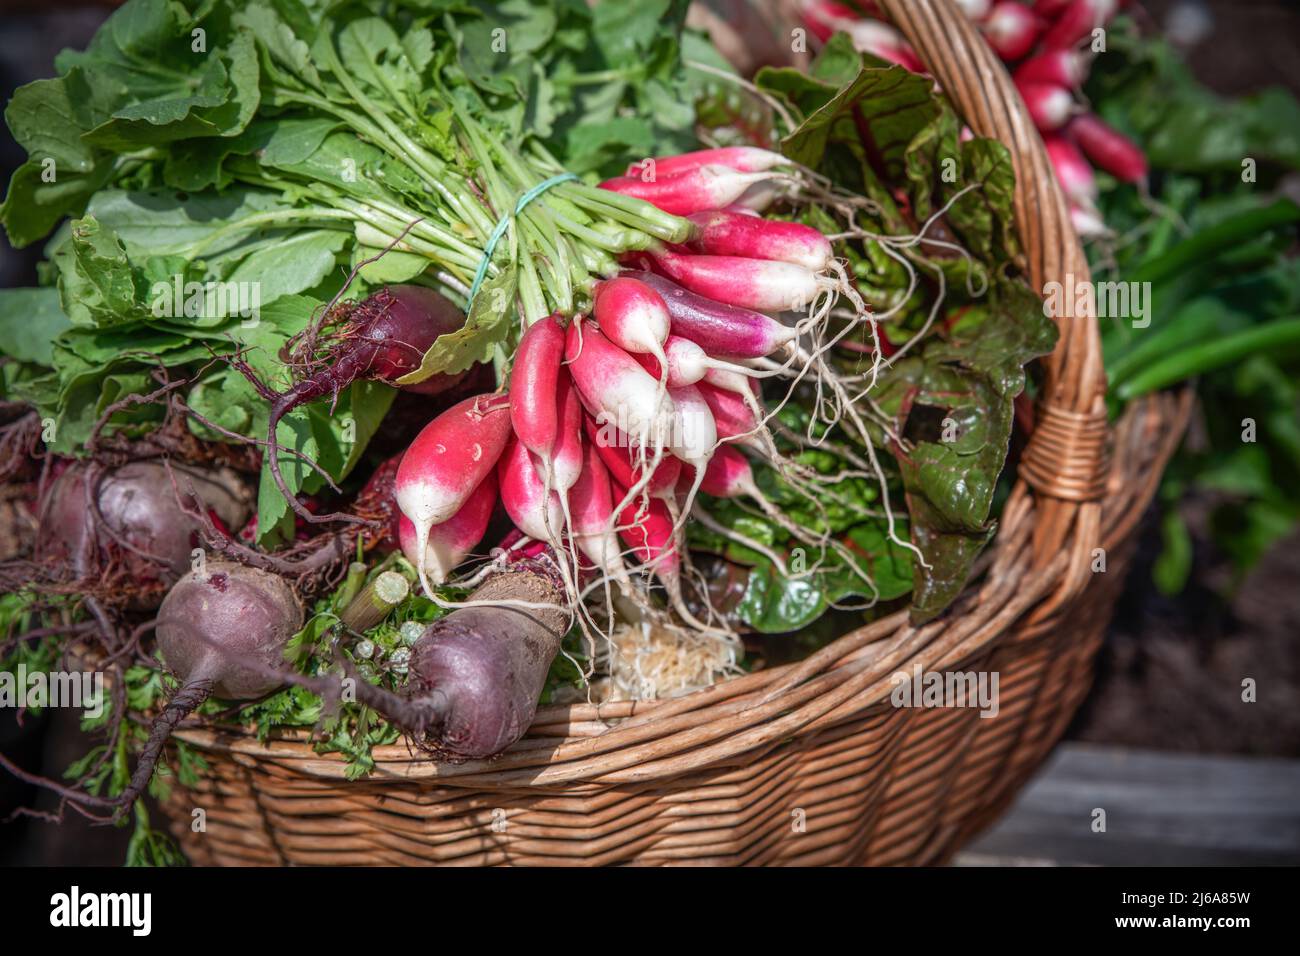 tasted and fresh carots vegetables on a market Stock Photo